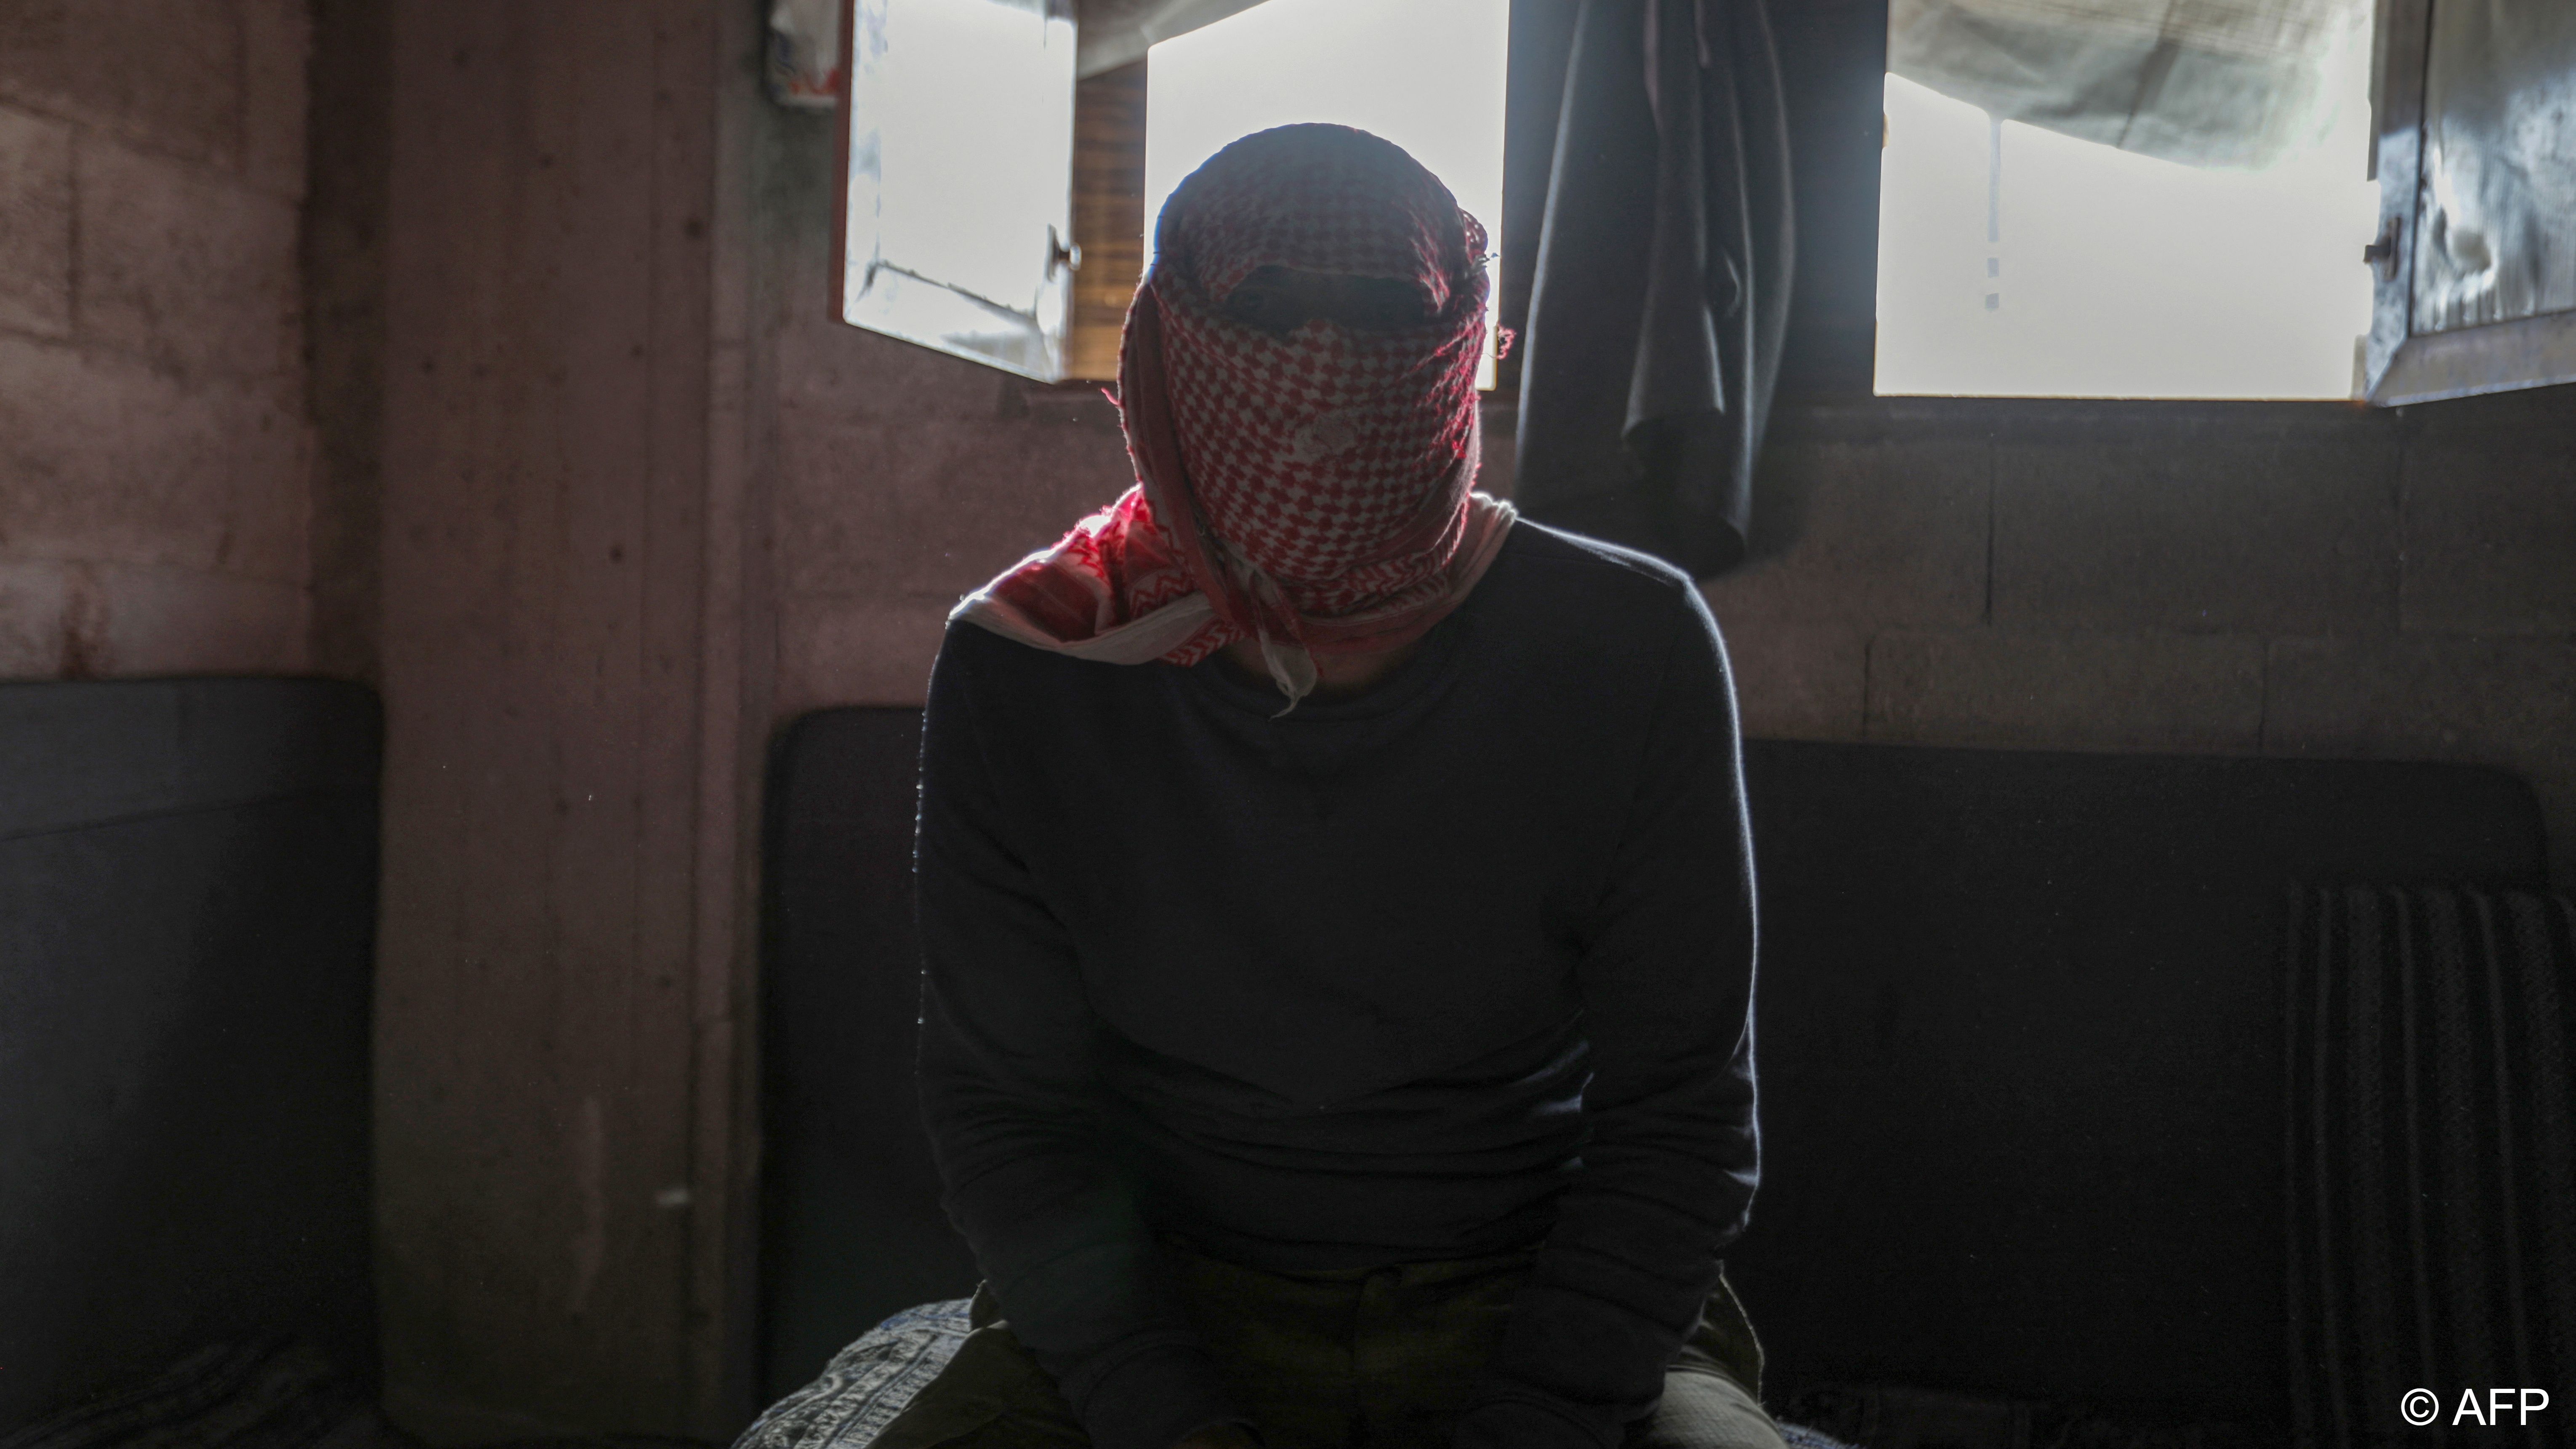 A captagon dealer masks his face with a traditional keffiyeh scarf before an AFP interview in Aleppo, Syria (image: AFP)